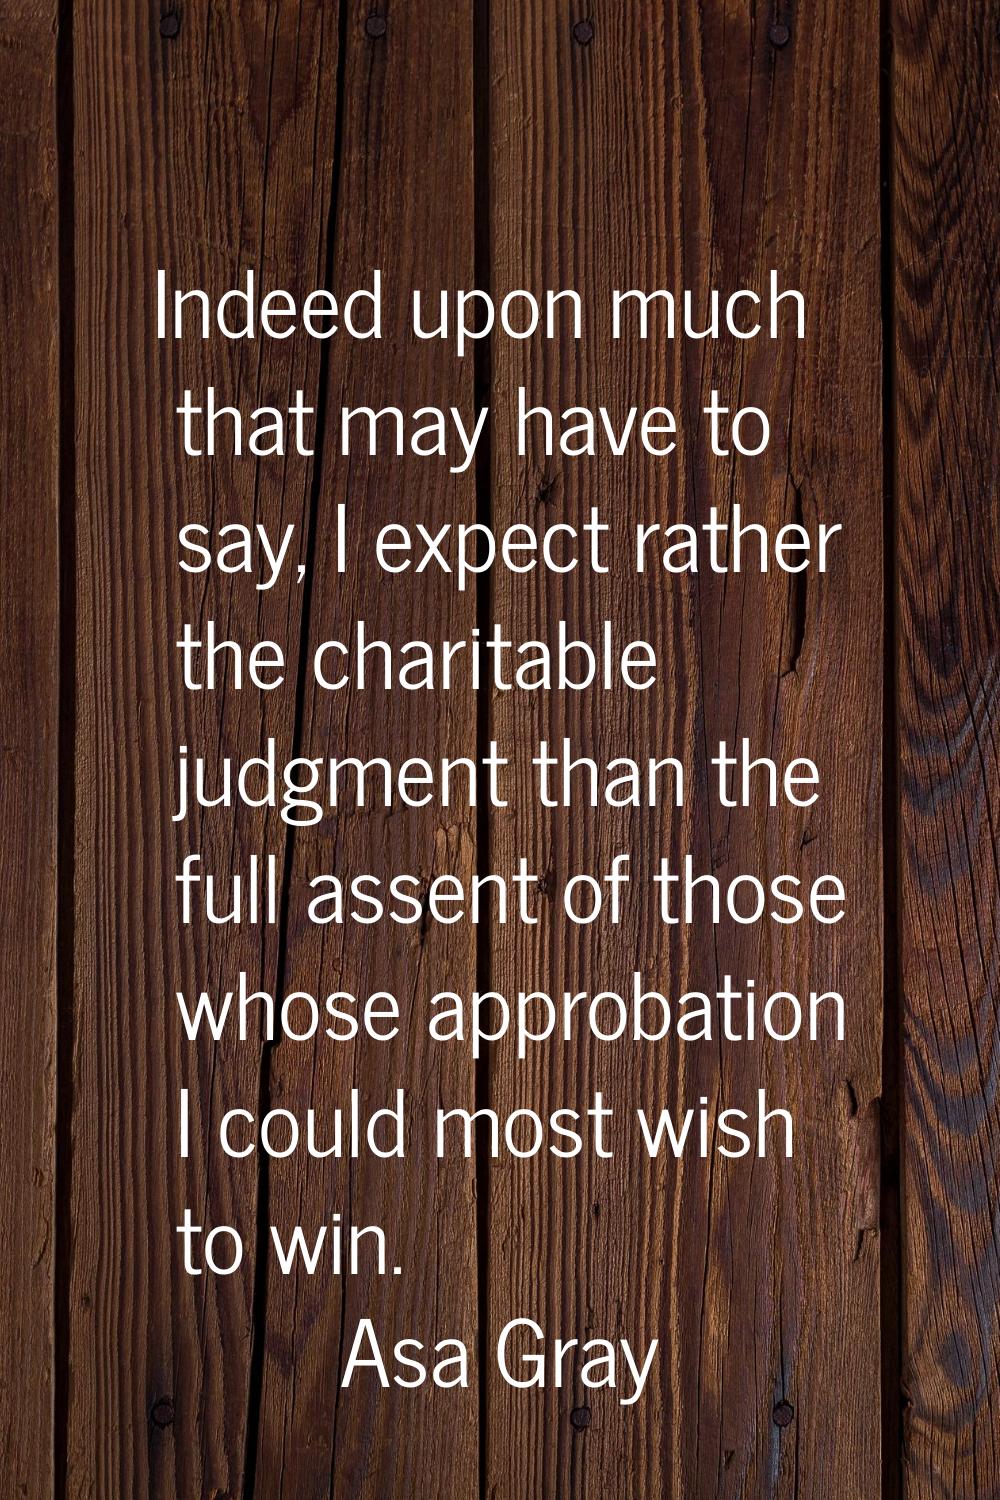 Indeed upon much that may have to say, I expect rather the charitable judgment than the full assent